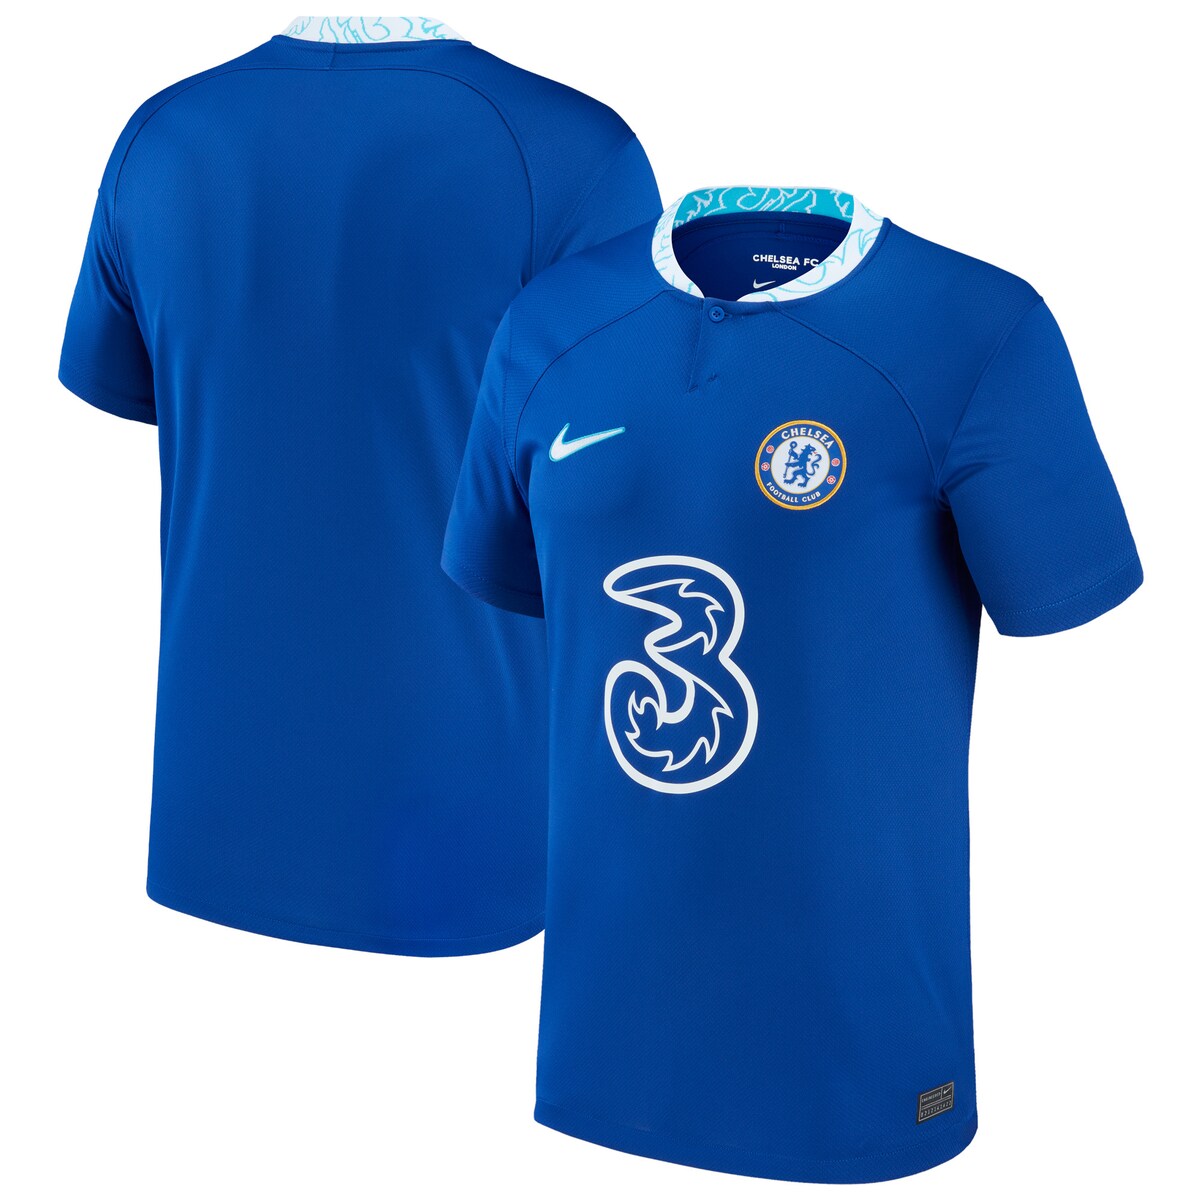 Show everyone that you're the number one fan of Chelsea with this 2022/23 Replica Home Jersey from Nike. This jersey replicates the style worn by the players out on the pitch, so you can look and feel like you're on the team. The jersey features ventilated mesh inserts to keep you cool and comfortable as the game heats up. The jersey displays embroidered Chelsea graphics on the left chest so that your can keep your team close to you heart.Material: 100% PolyesterReplica JerseyDri-FIT technology wicks away moistureSewn on embroidered team crest on left chestJersey Color Style: HomeOfficially licensedImportedMachine wash, tumble dry lowEmbroidered Nike logo on right chestBrand: NikeWoven Authentic Nike jock tag on left hemTagless collar for added comfortNike Dry fabrics move sweat from your skin for quicker evaporationhelping you stay dry, comfortable and focused on the task at handVentilated mesh panel inserts